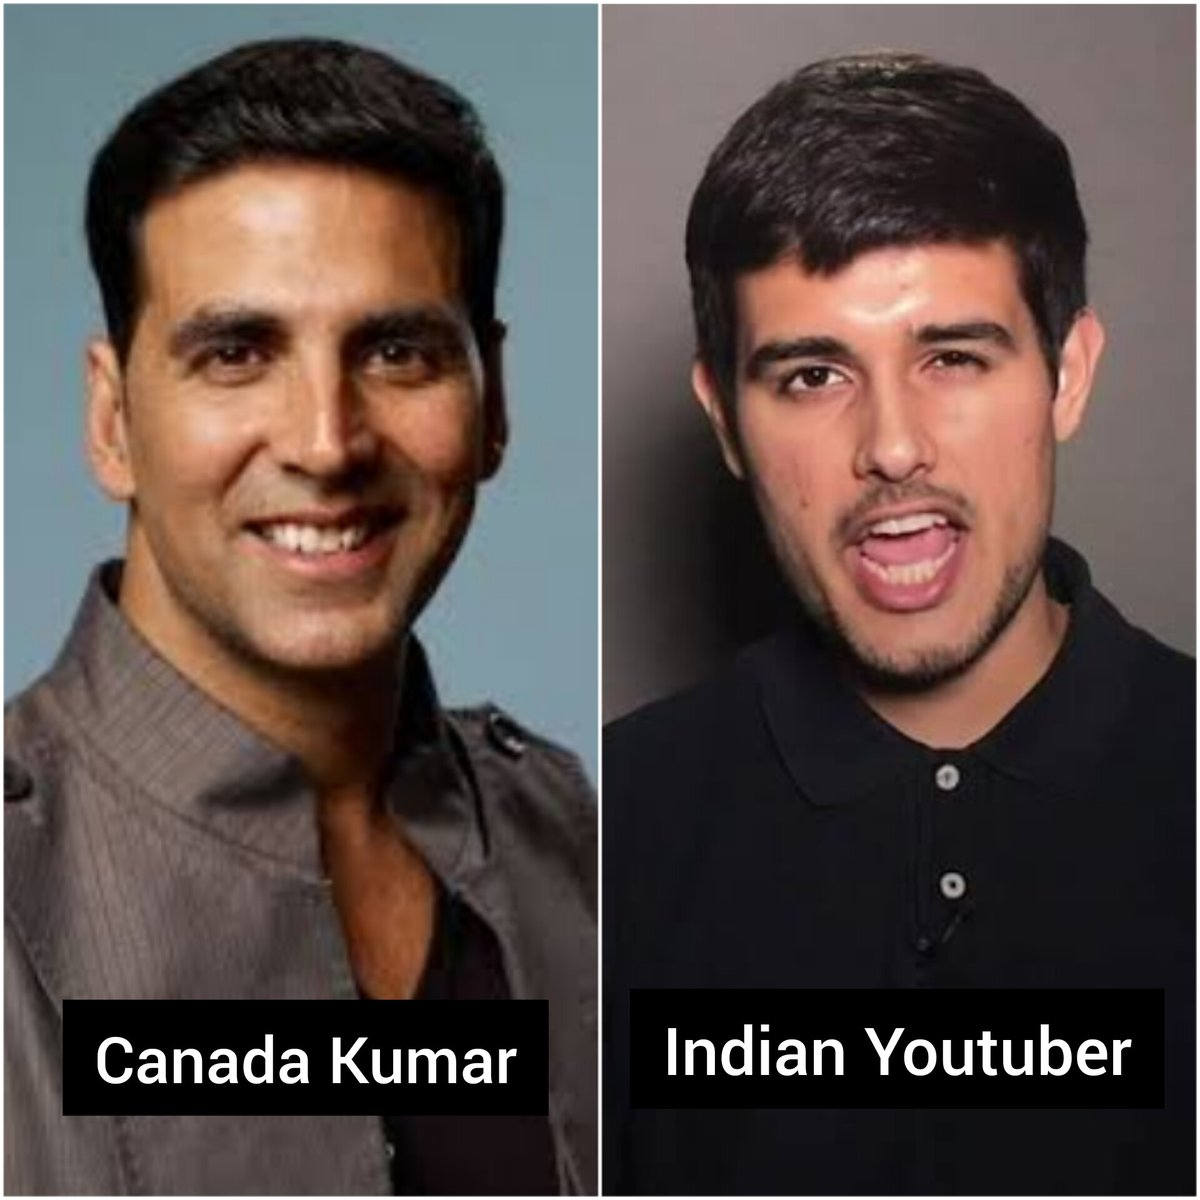 Akshay Kumar lives in India, works in India, pays tax in India, has never lived in Canada but he is Canada Kumar.

Dhruv Rathee has lived all his adult life in Germany, works in Germany, pays tax in Germany but he is Indian Youtuber.

#doglaNRI